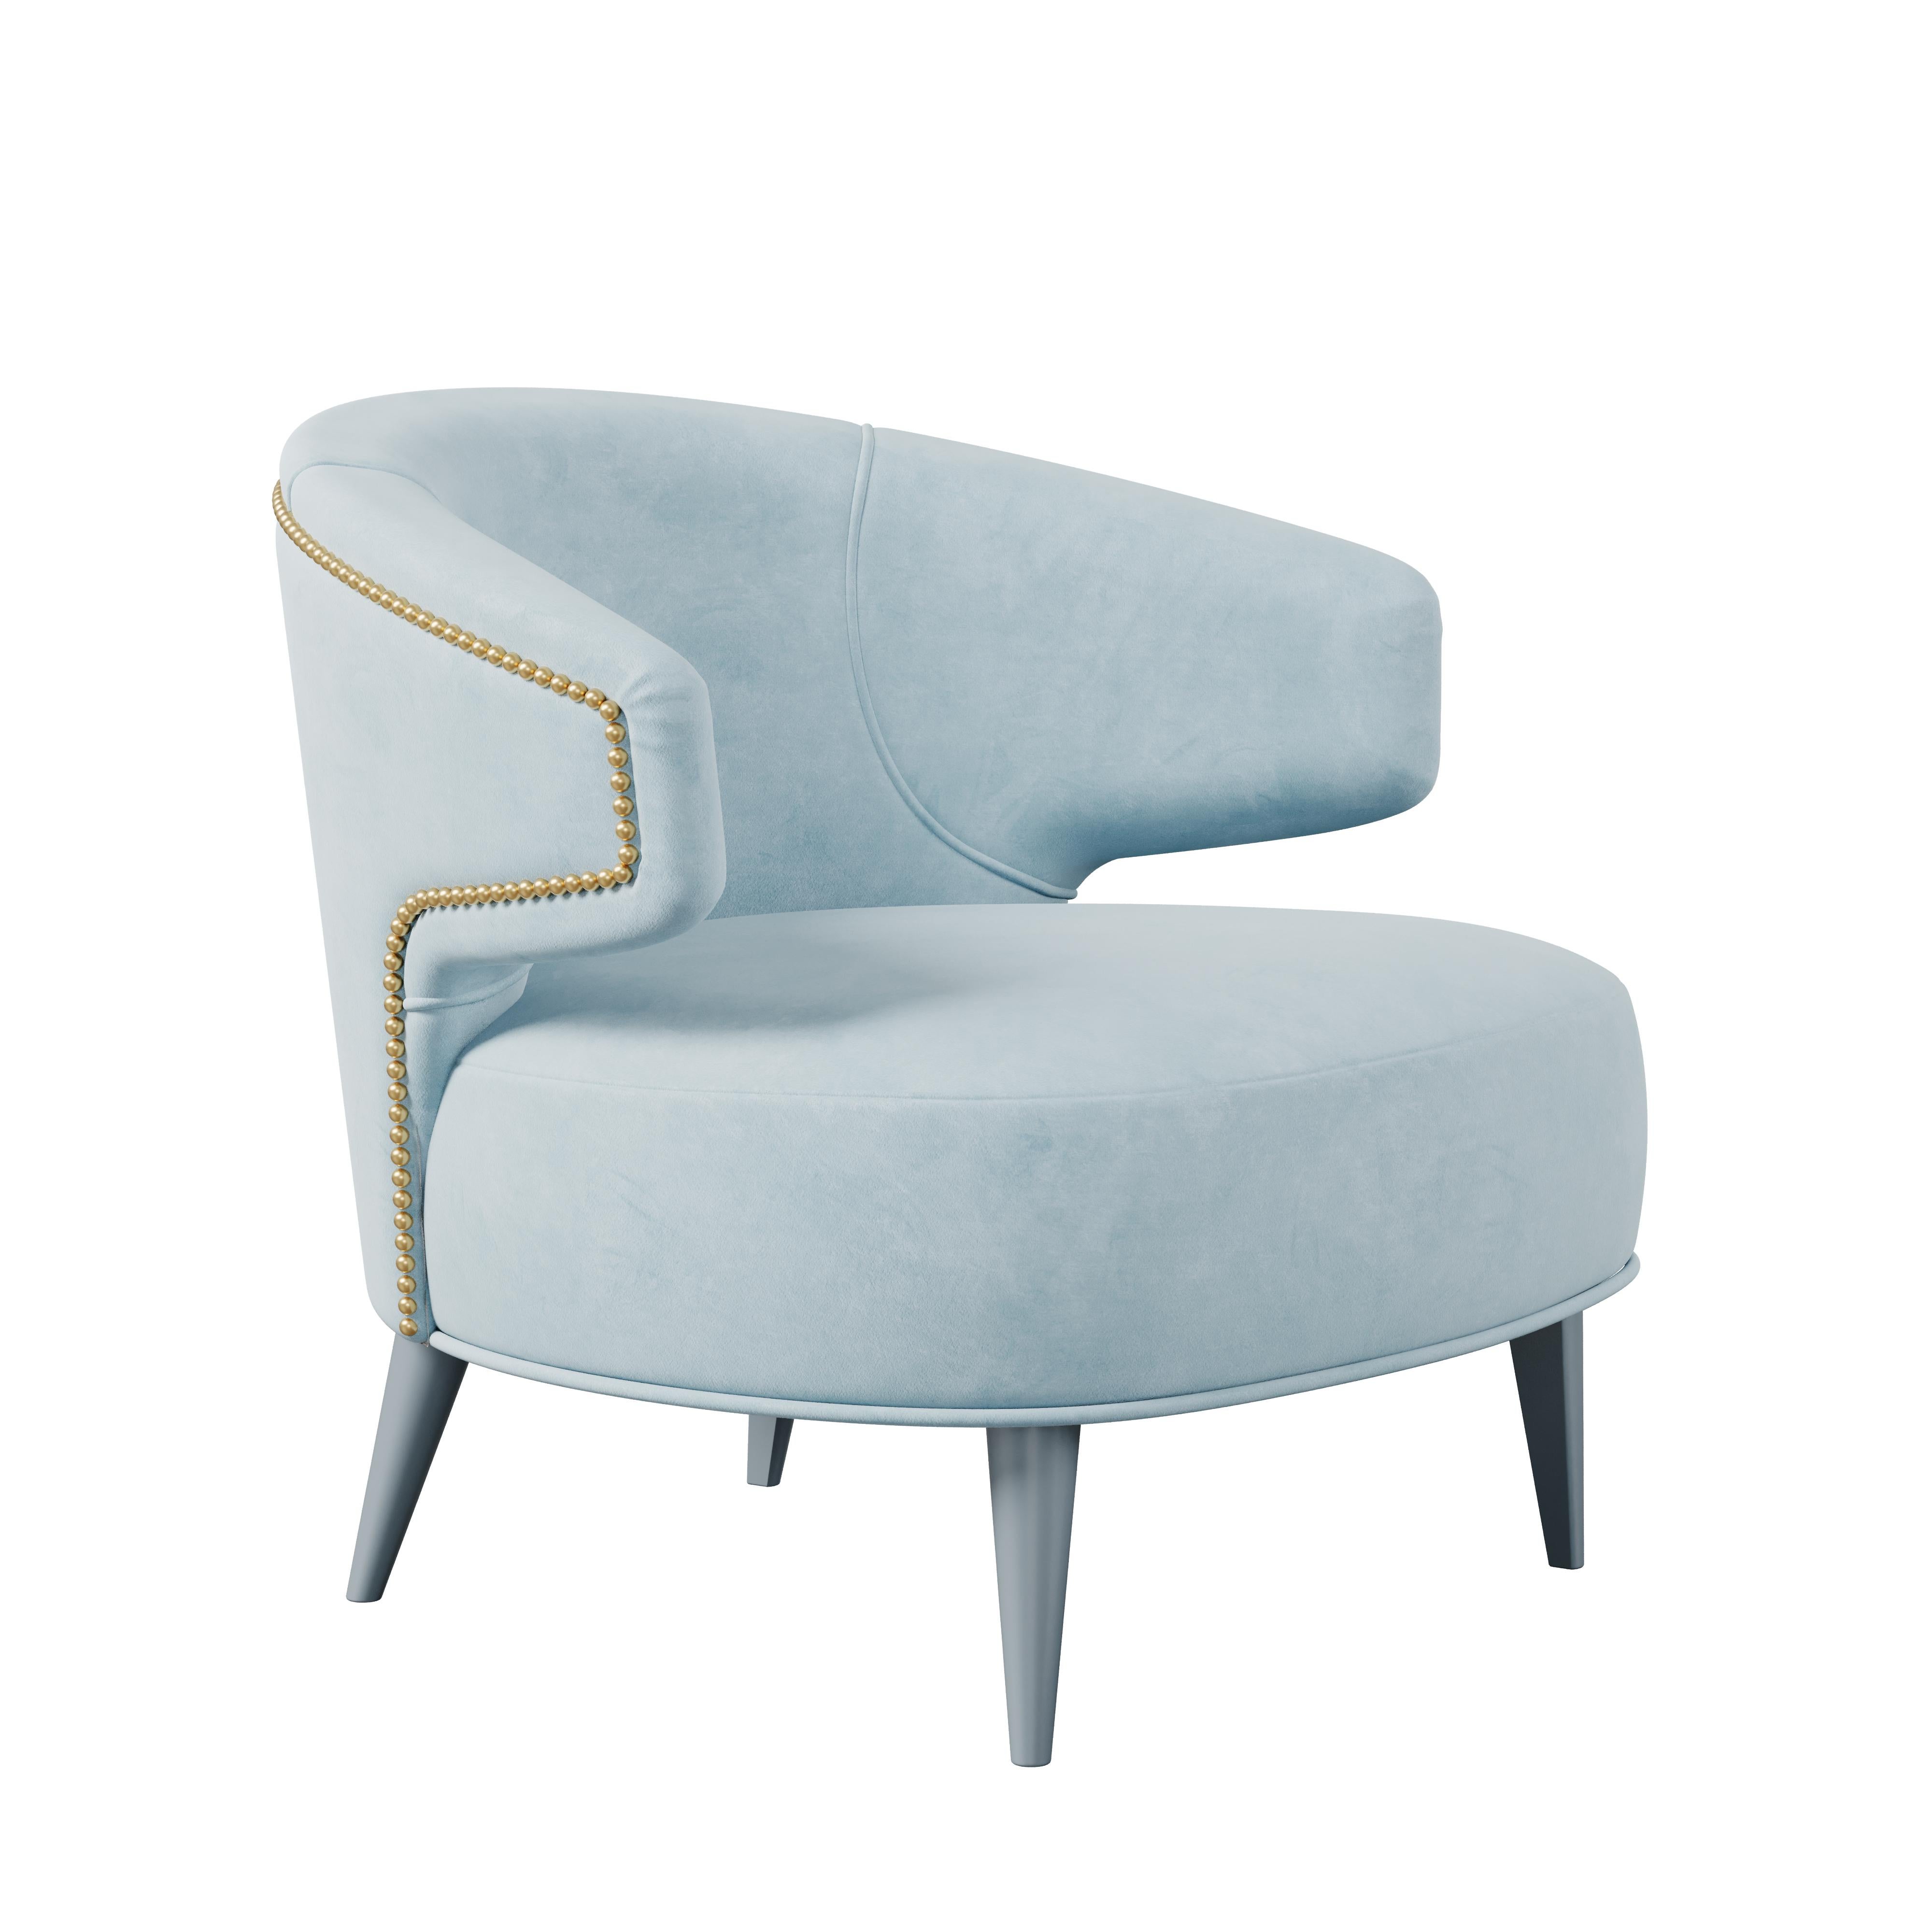 The beautiful 50s Hollywood actress Tippi Hedren is the best definition of sophistication, self-assurance and cool-blonde style. Like Hedren, the Tippi Mid-Century Modern Armchair gives a fresh and lively feel to any room. We can surely say that